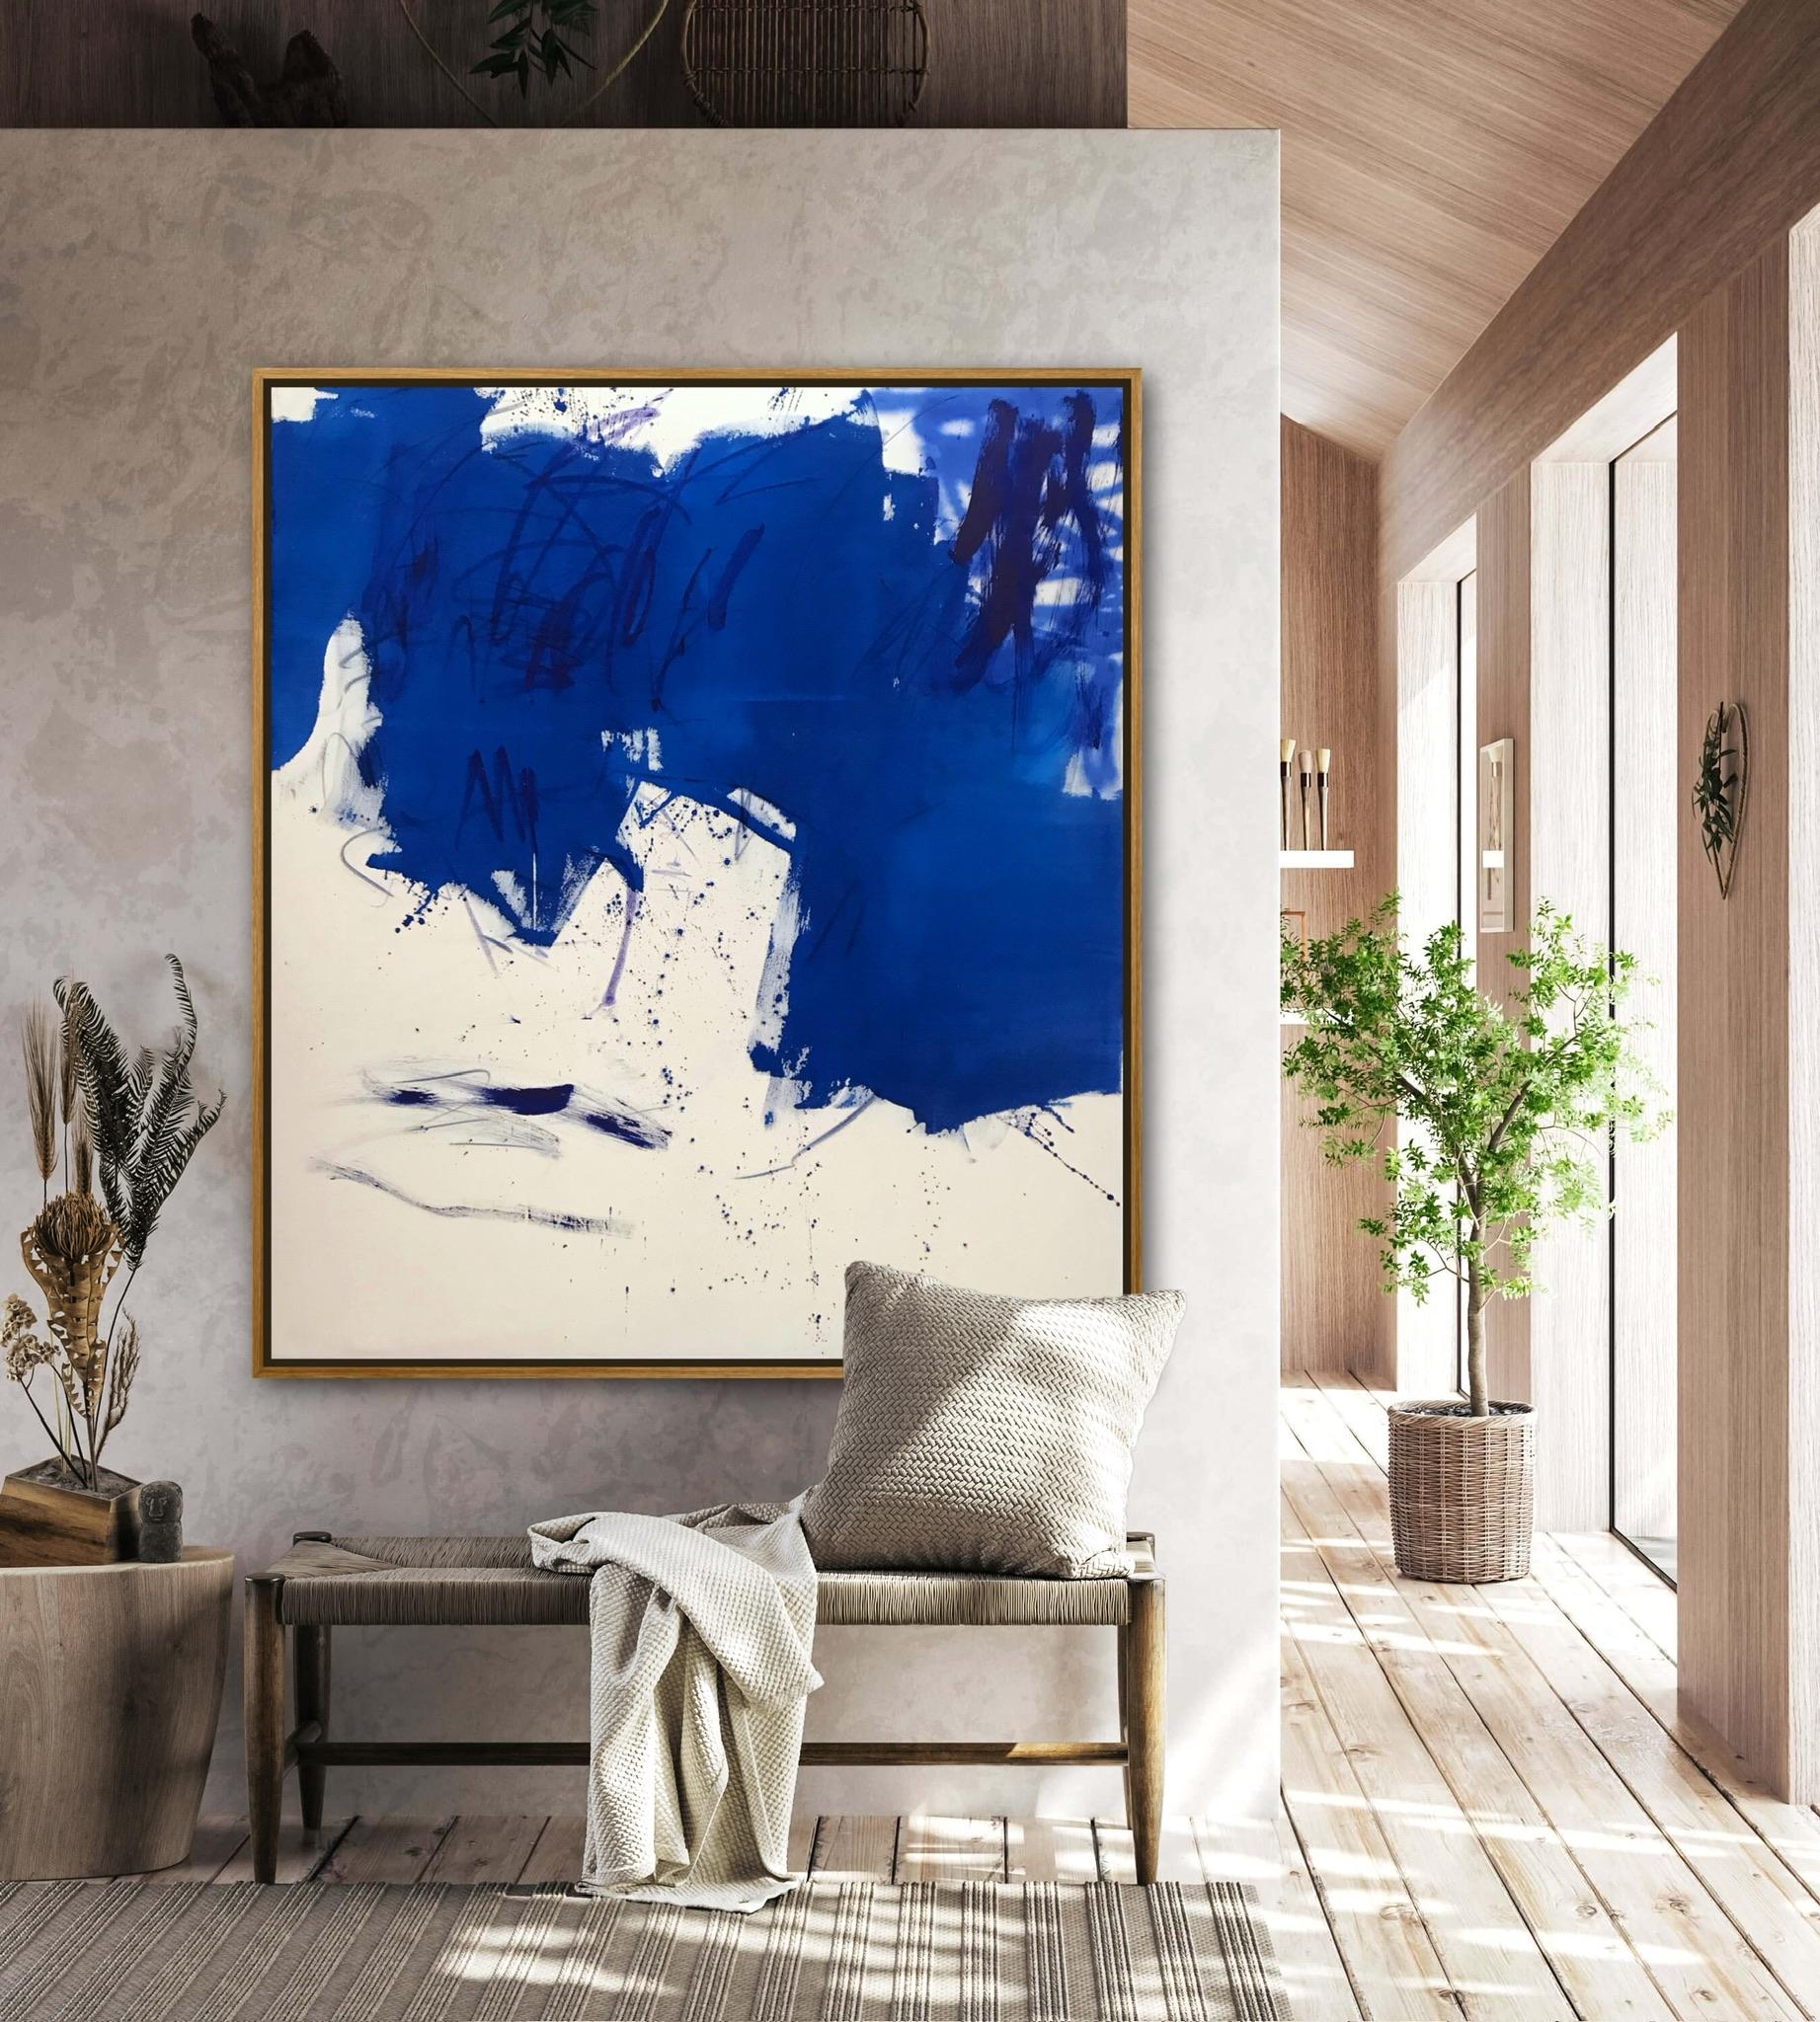 Azur and sea (Abstract painting) - Painting by Manuela Karin Knaut